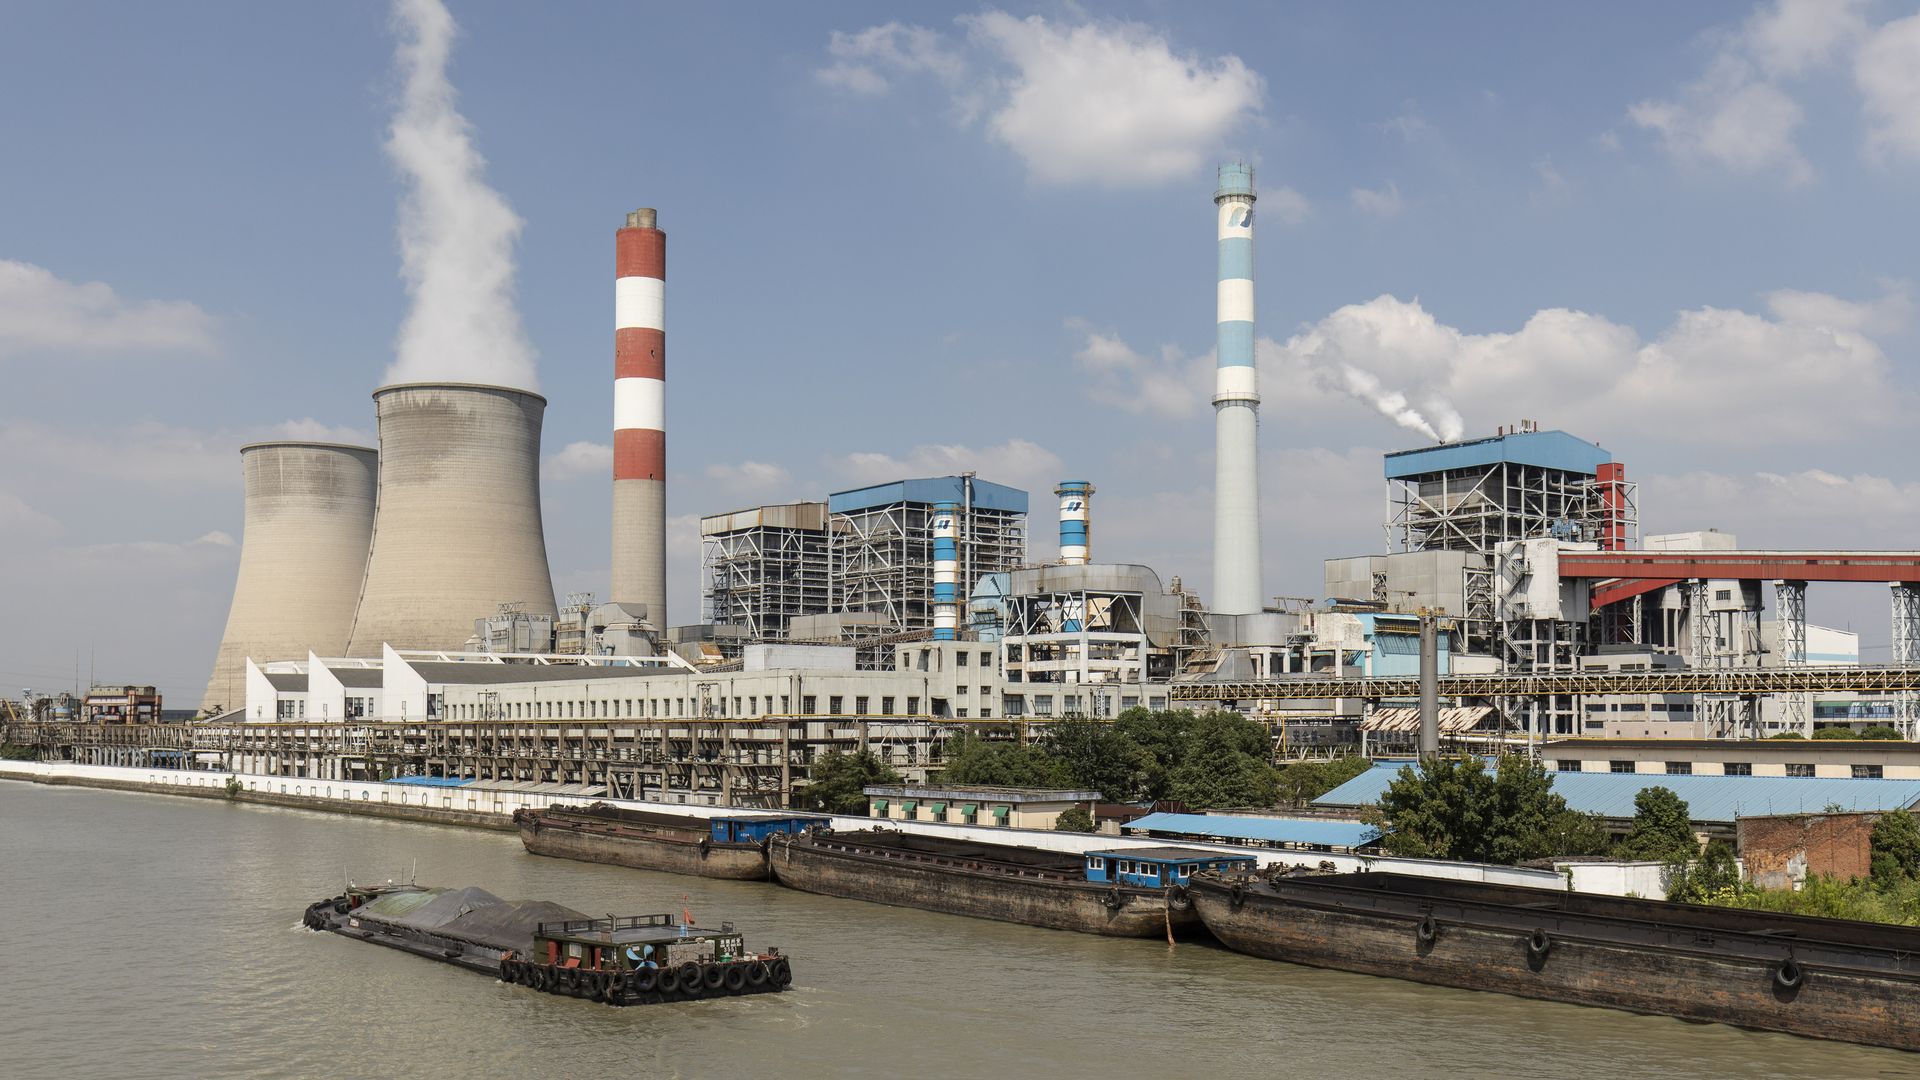 A barge travels past the Wangting Power Plant in Wangting, China, on Sept. 30.